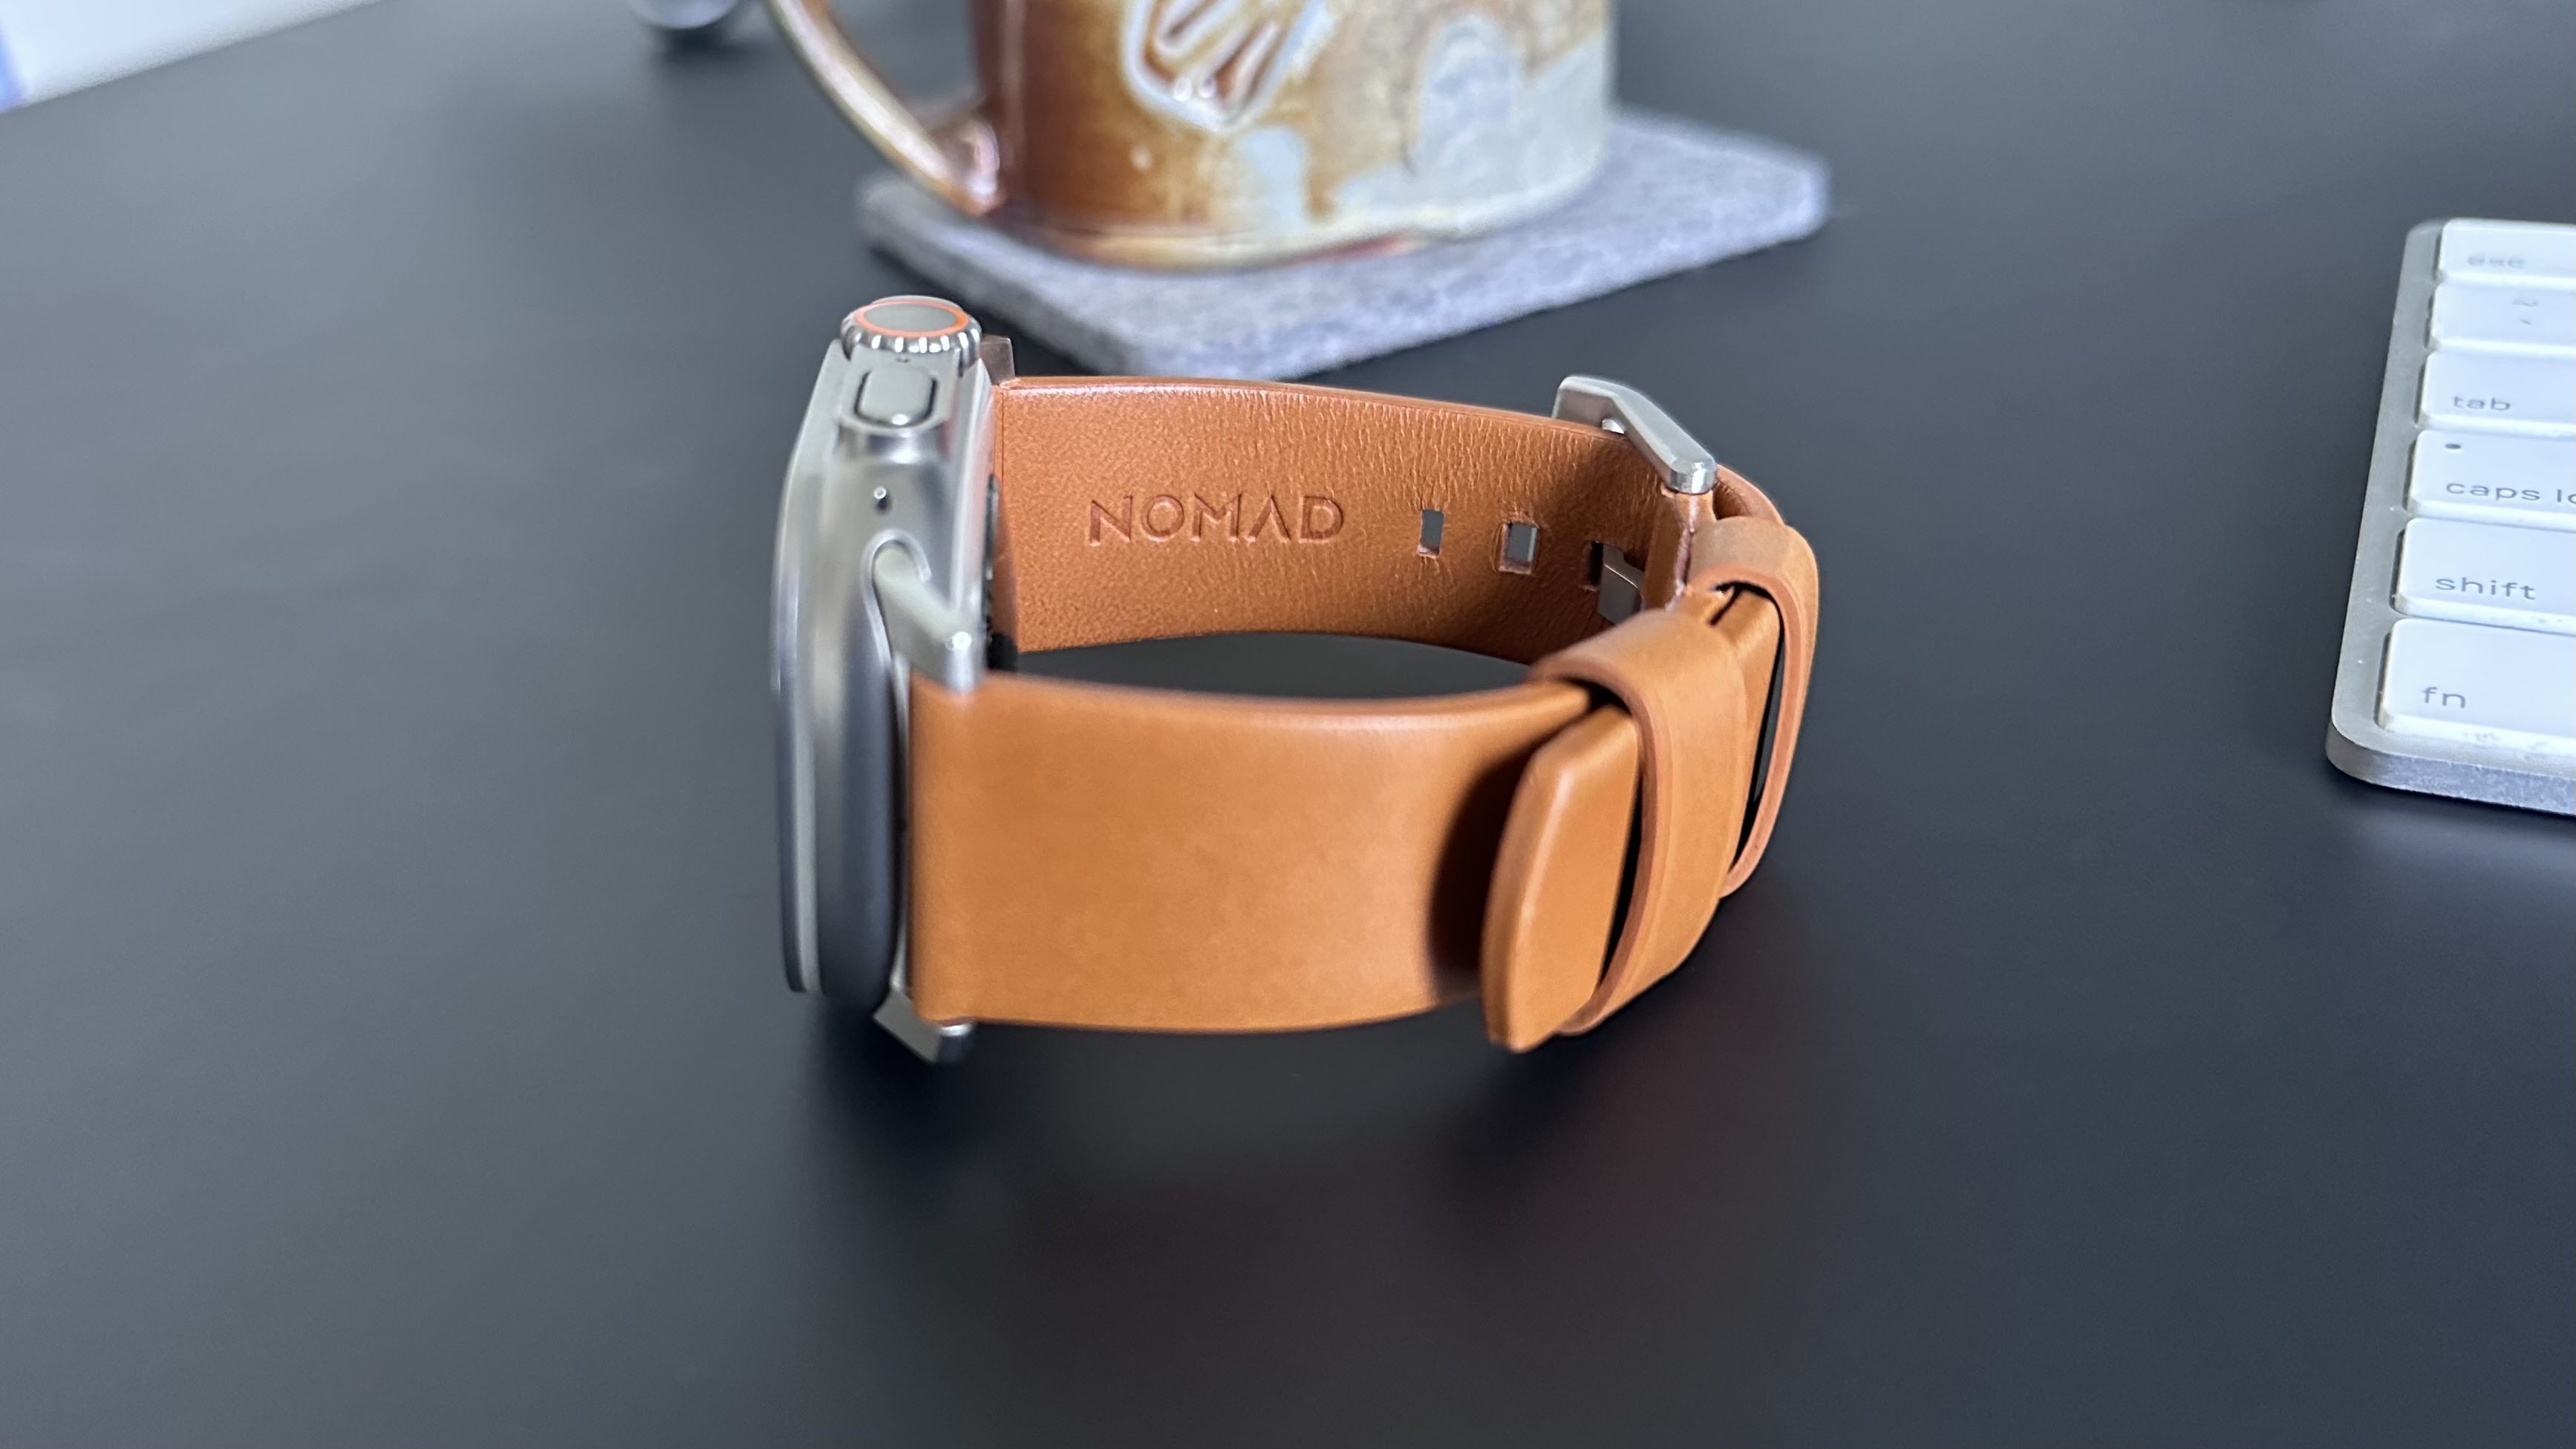 Nomad Modern Band Apple Watch up close